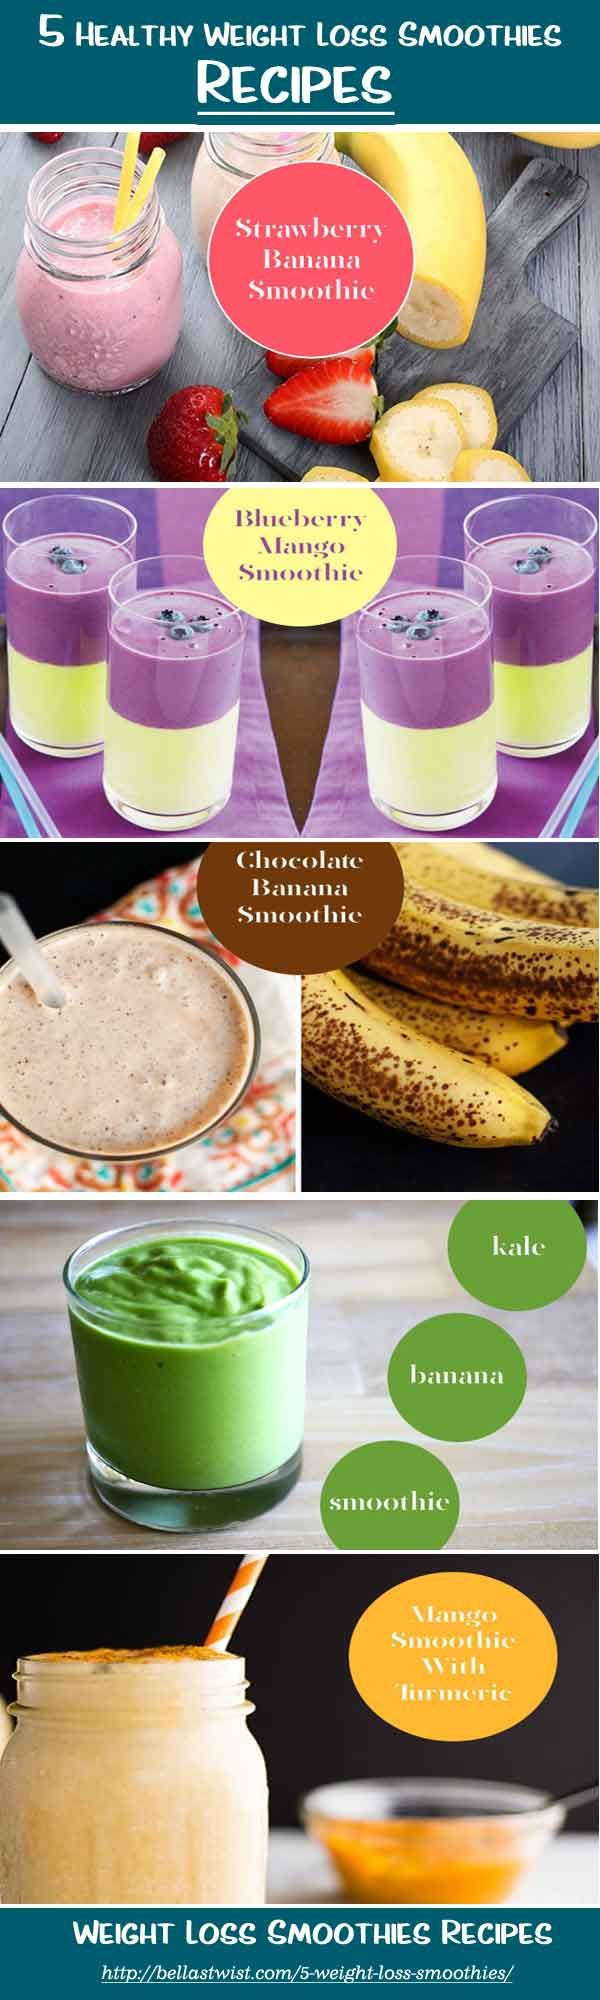 Diabetic Smoothies To Lose Weight
 100 Diabetic smoothie recipes on Pinterest